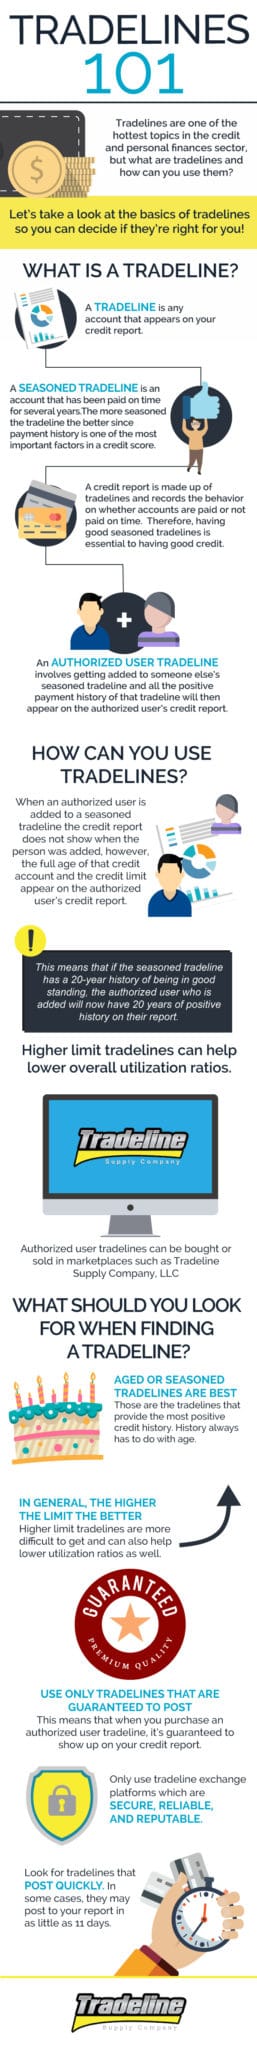 Tradeline infographic. How do tradelines work, what to look for, etc.